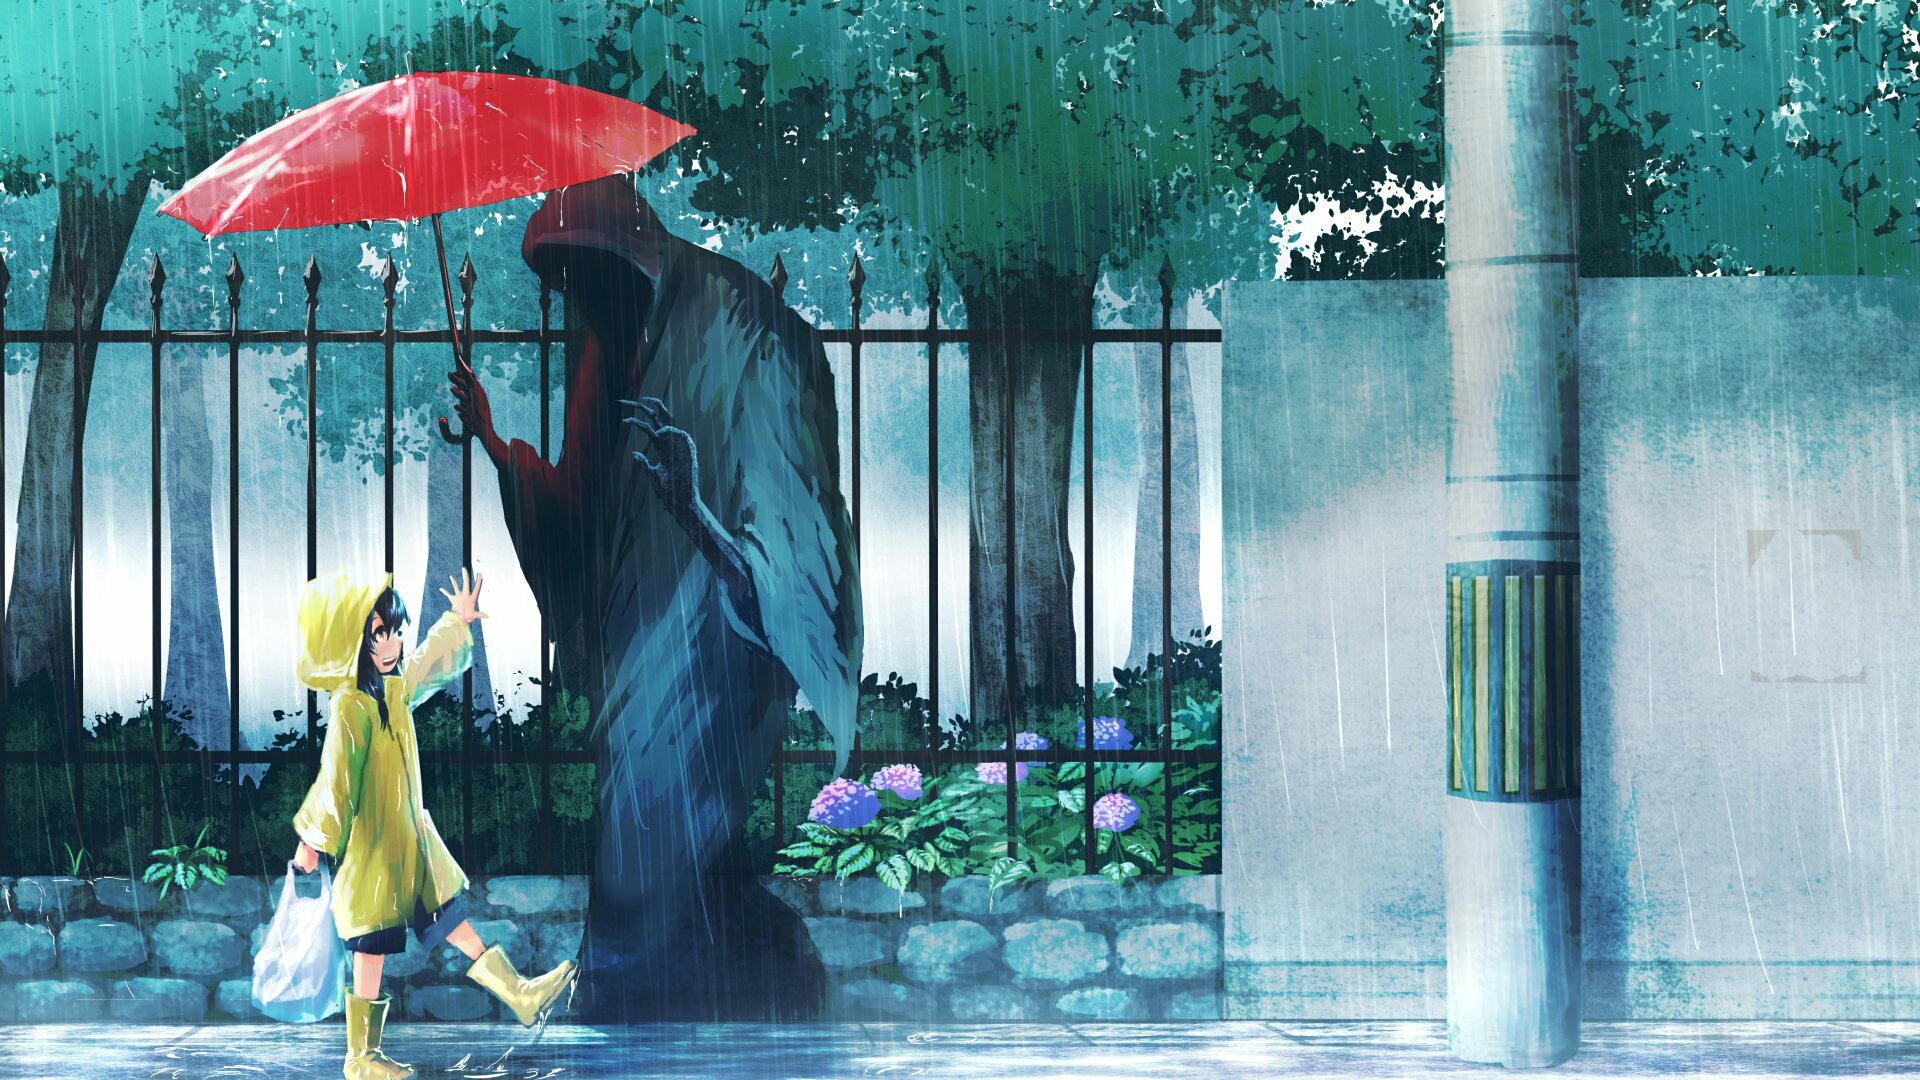 One Day Anime Girl In Rain In Street Walking Background Sad Anime Pictures  Background Image And Wallpaper for Free Download